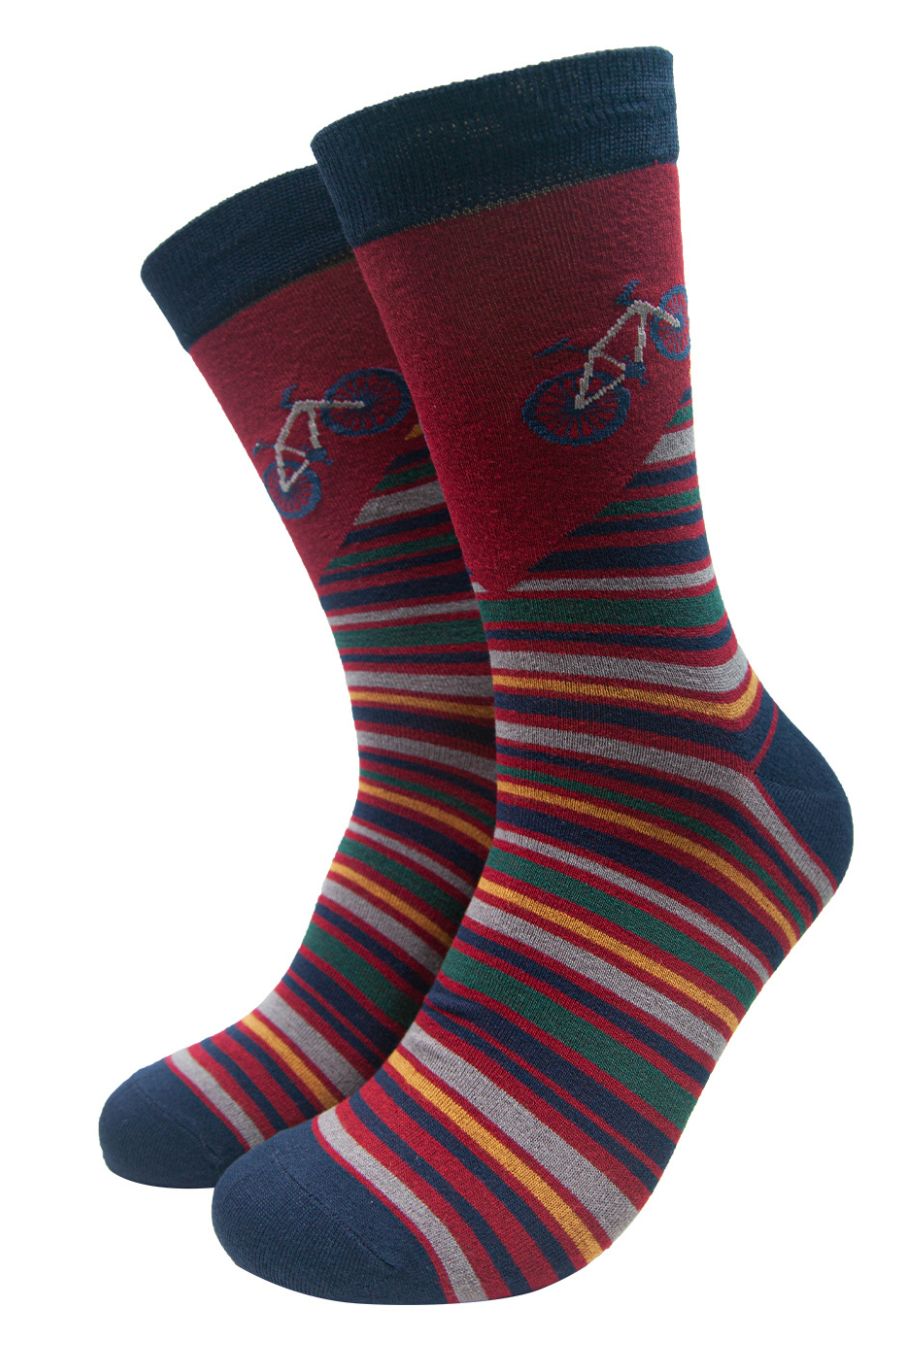 multicoloured striped socks featuring a mountain bike on the ankle